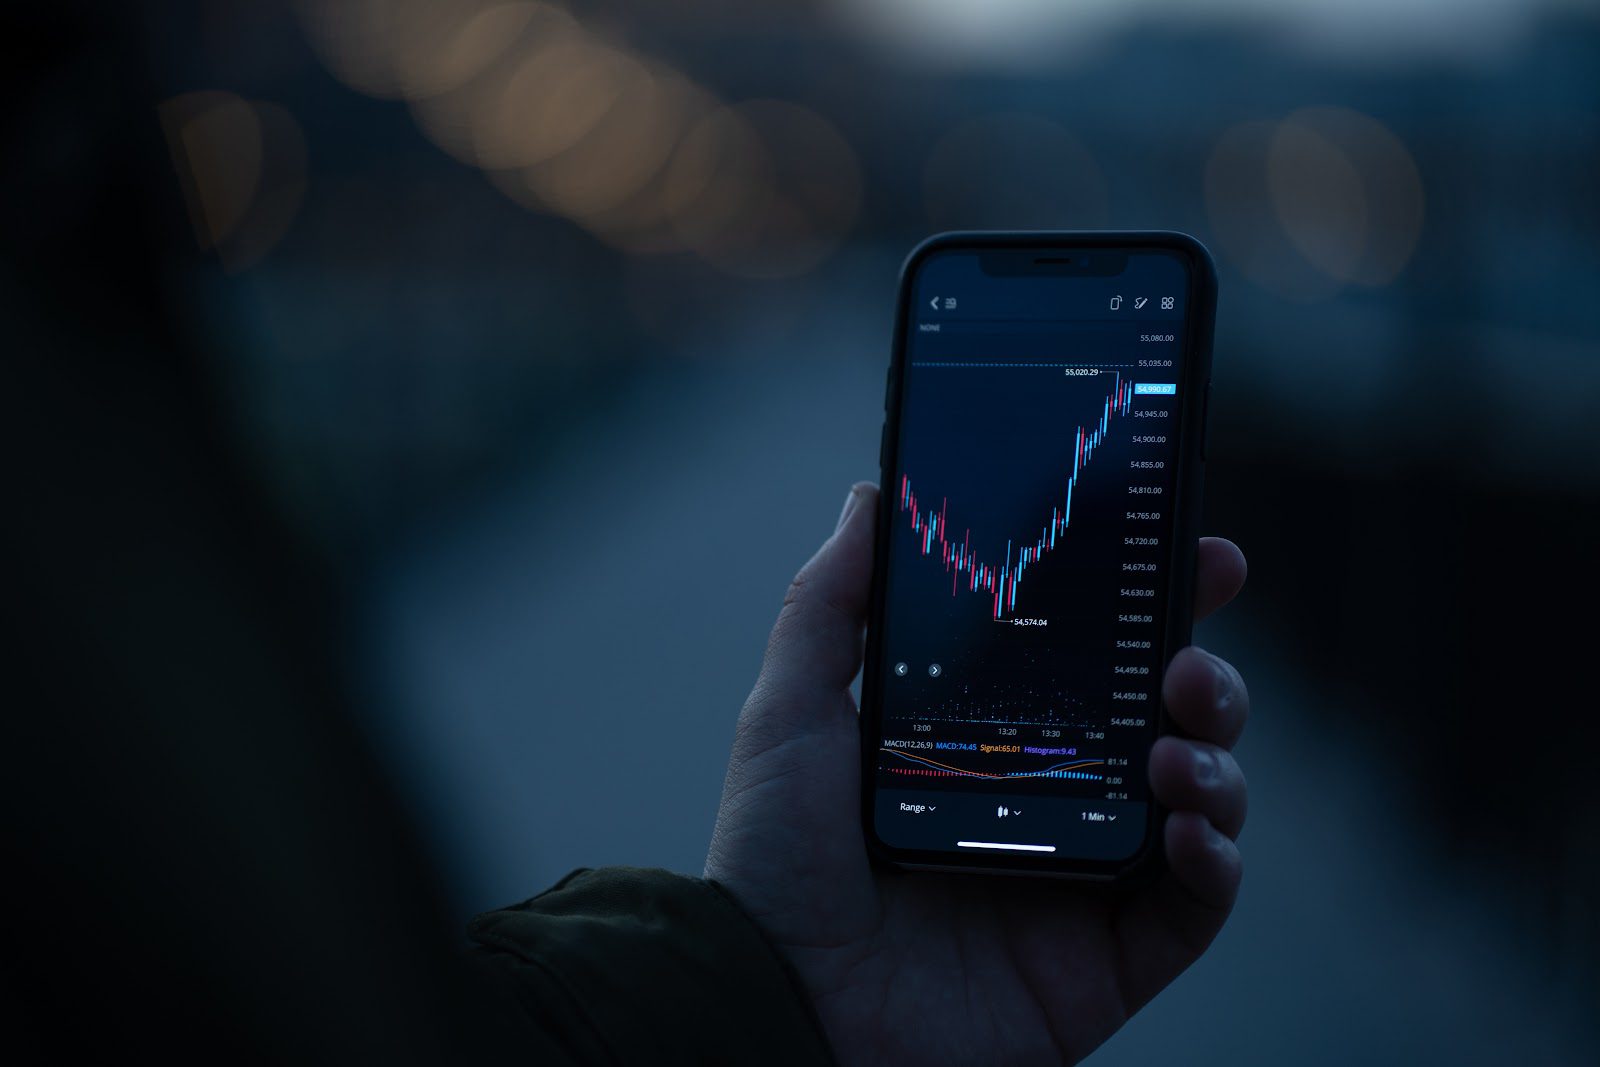 Businessman or trader using mobile phone to check real time stock market data while standing outdoors, selective focus on male hand holding smartphone with forex graph chart